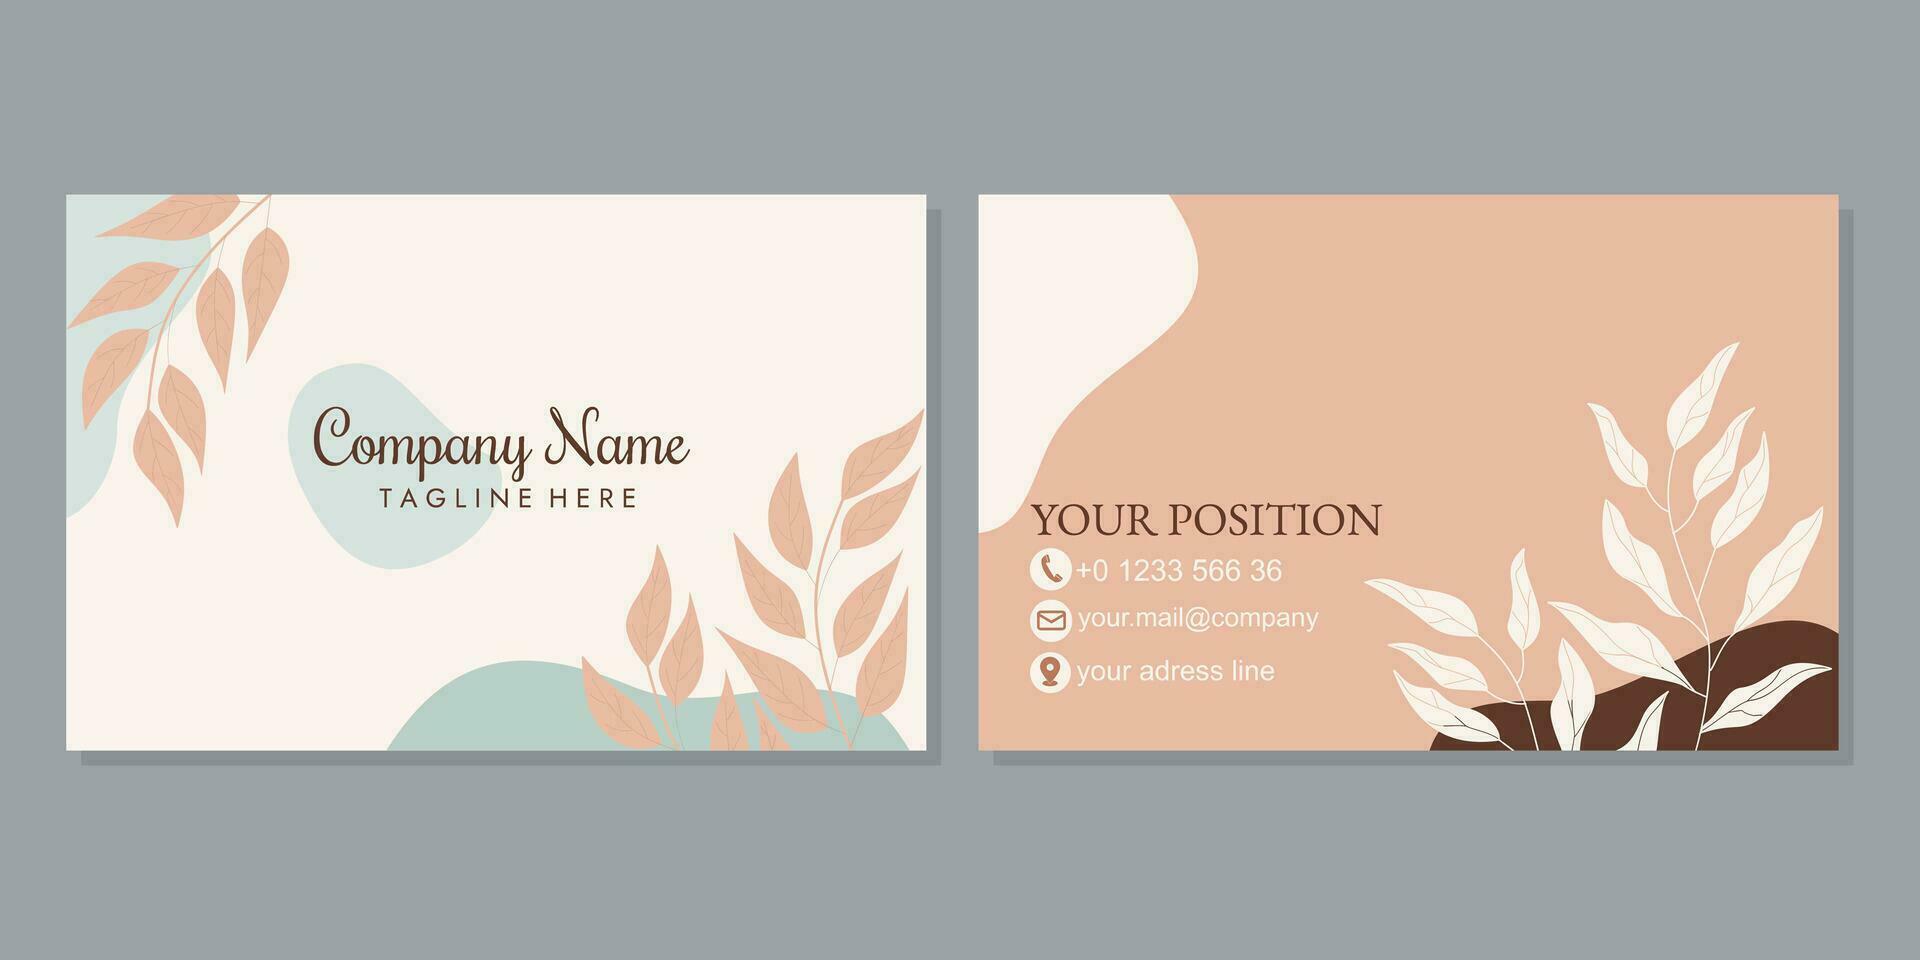 Set of modern business card print templates. design with hand drawn floral pattern. landscape orientation for identity cards, thank you cards, covers, invitations. vector